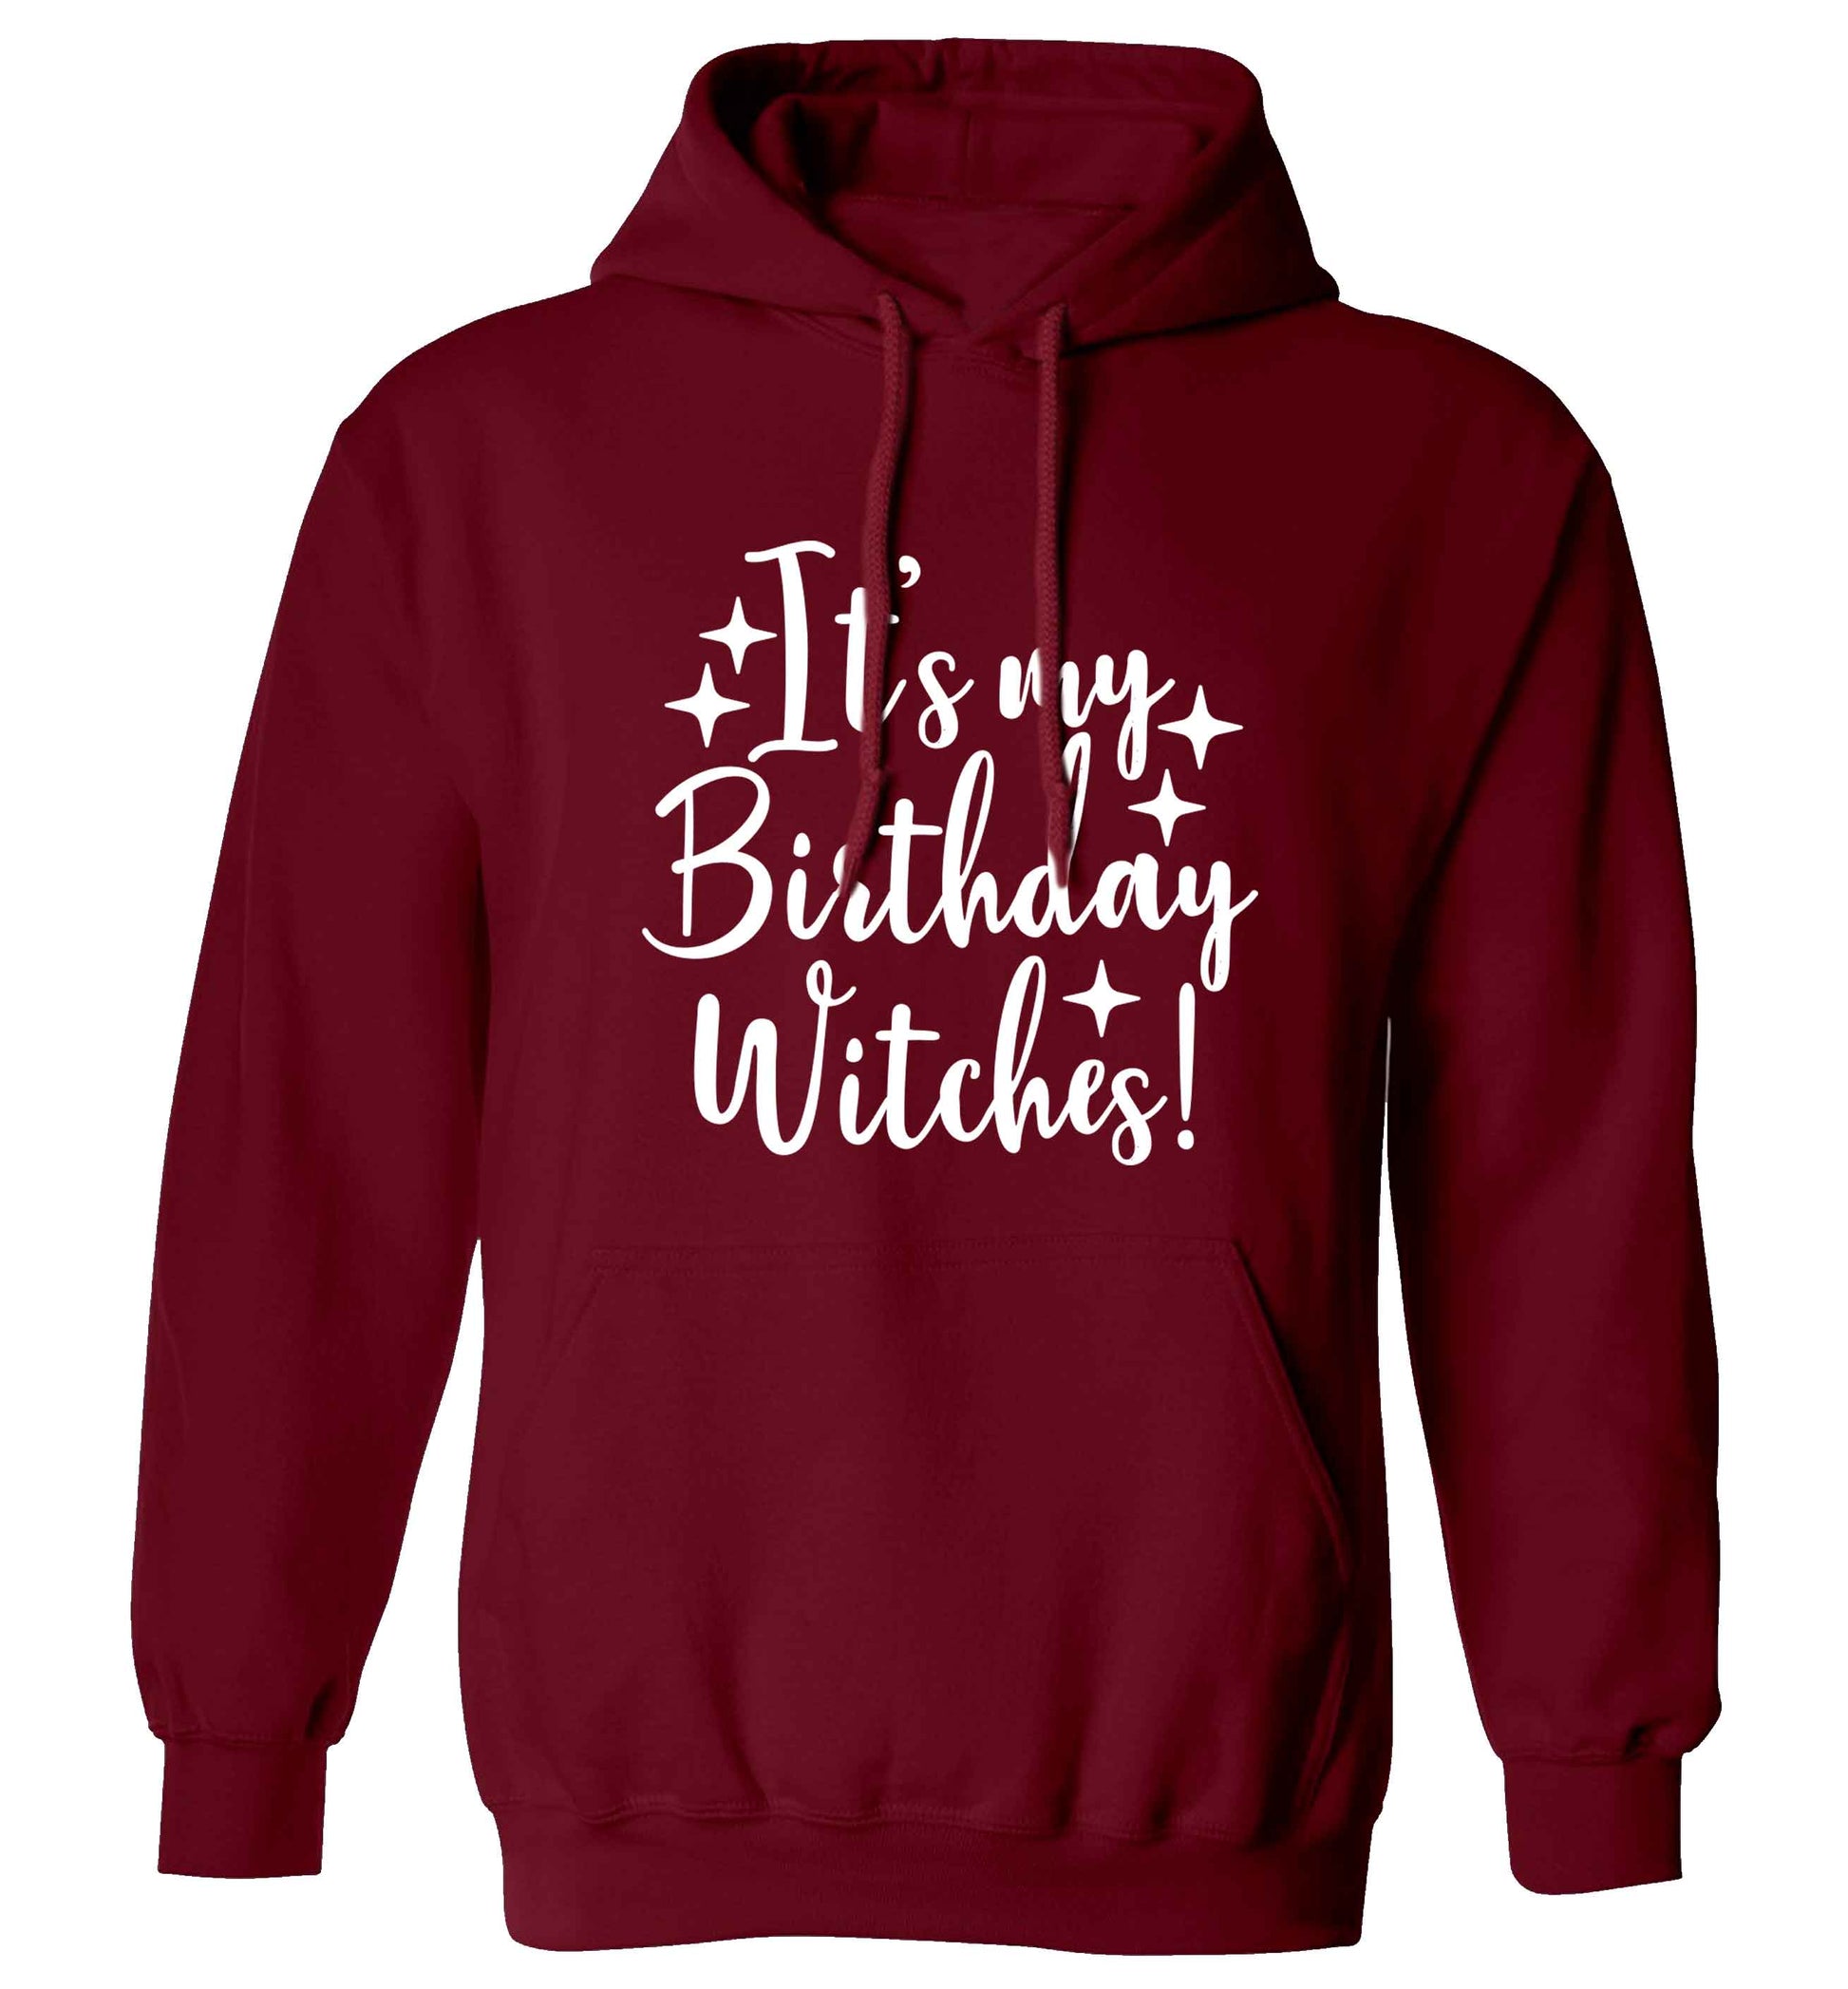 It's my birthday witches!adults unisex maroon hoodie 2XL